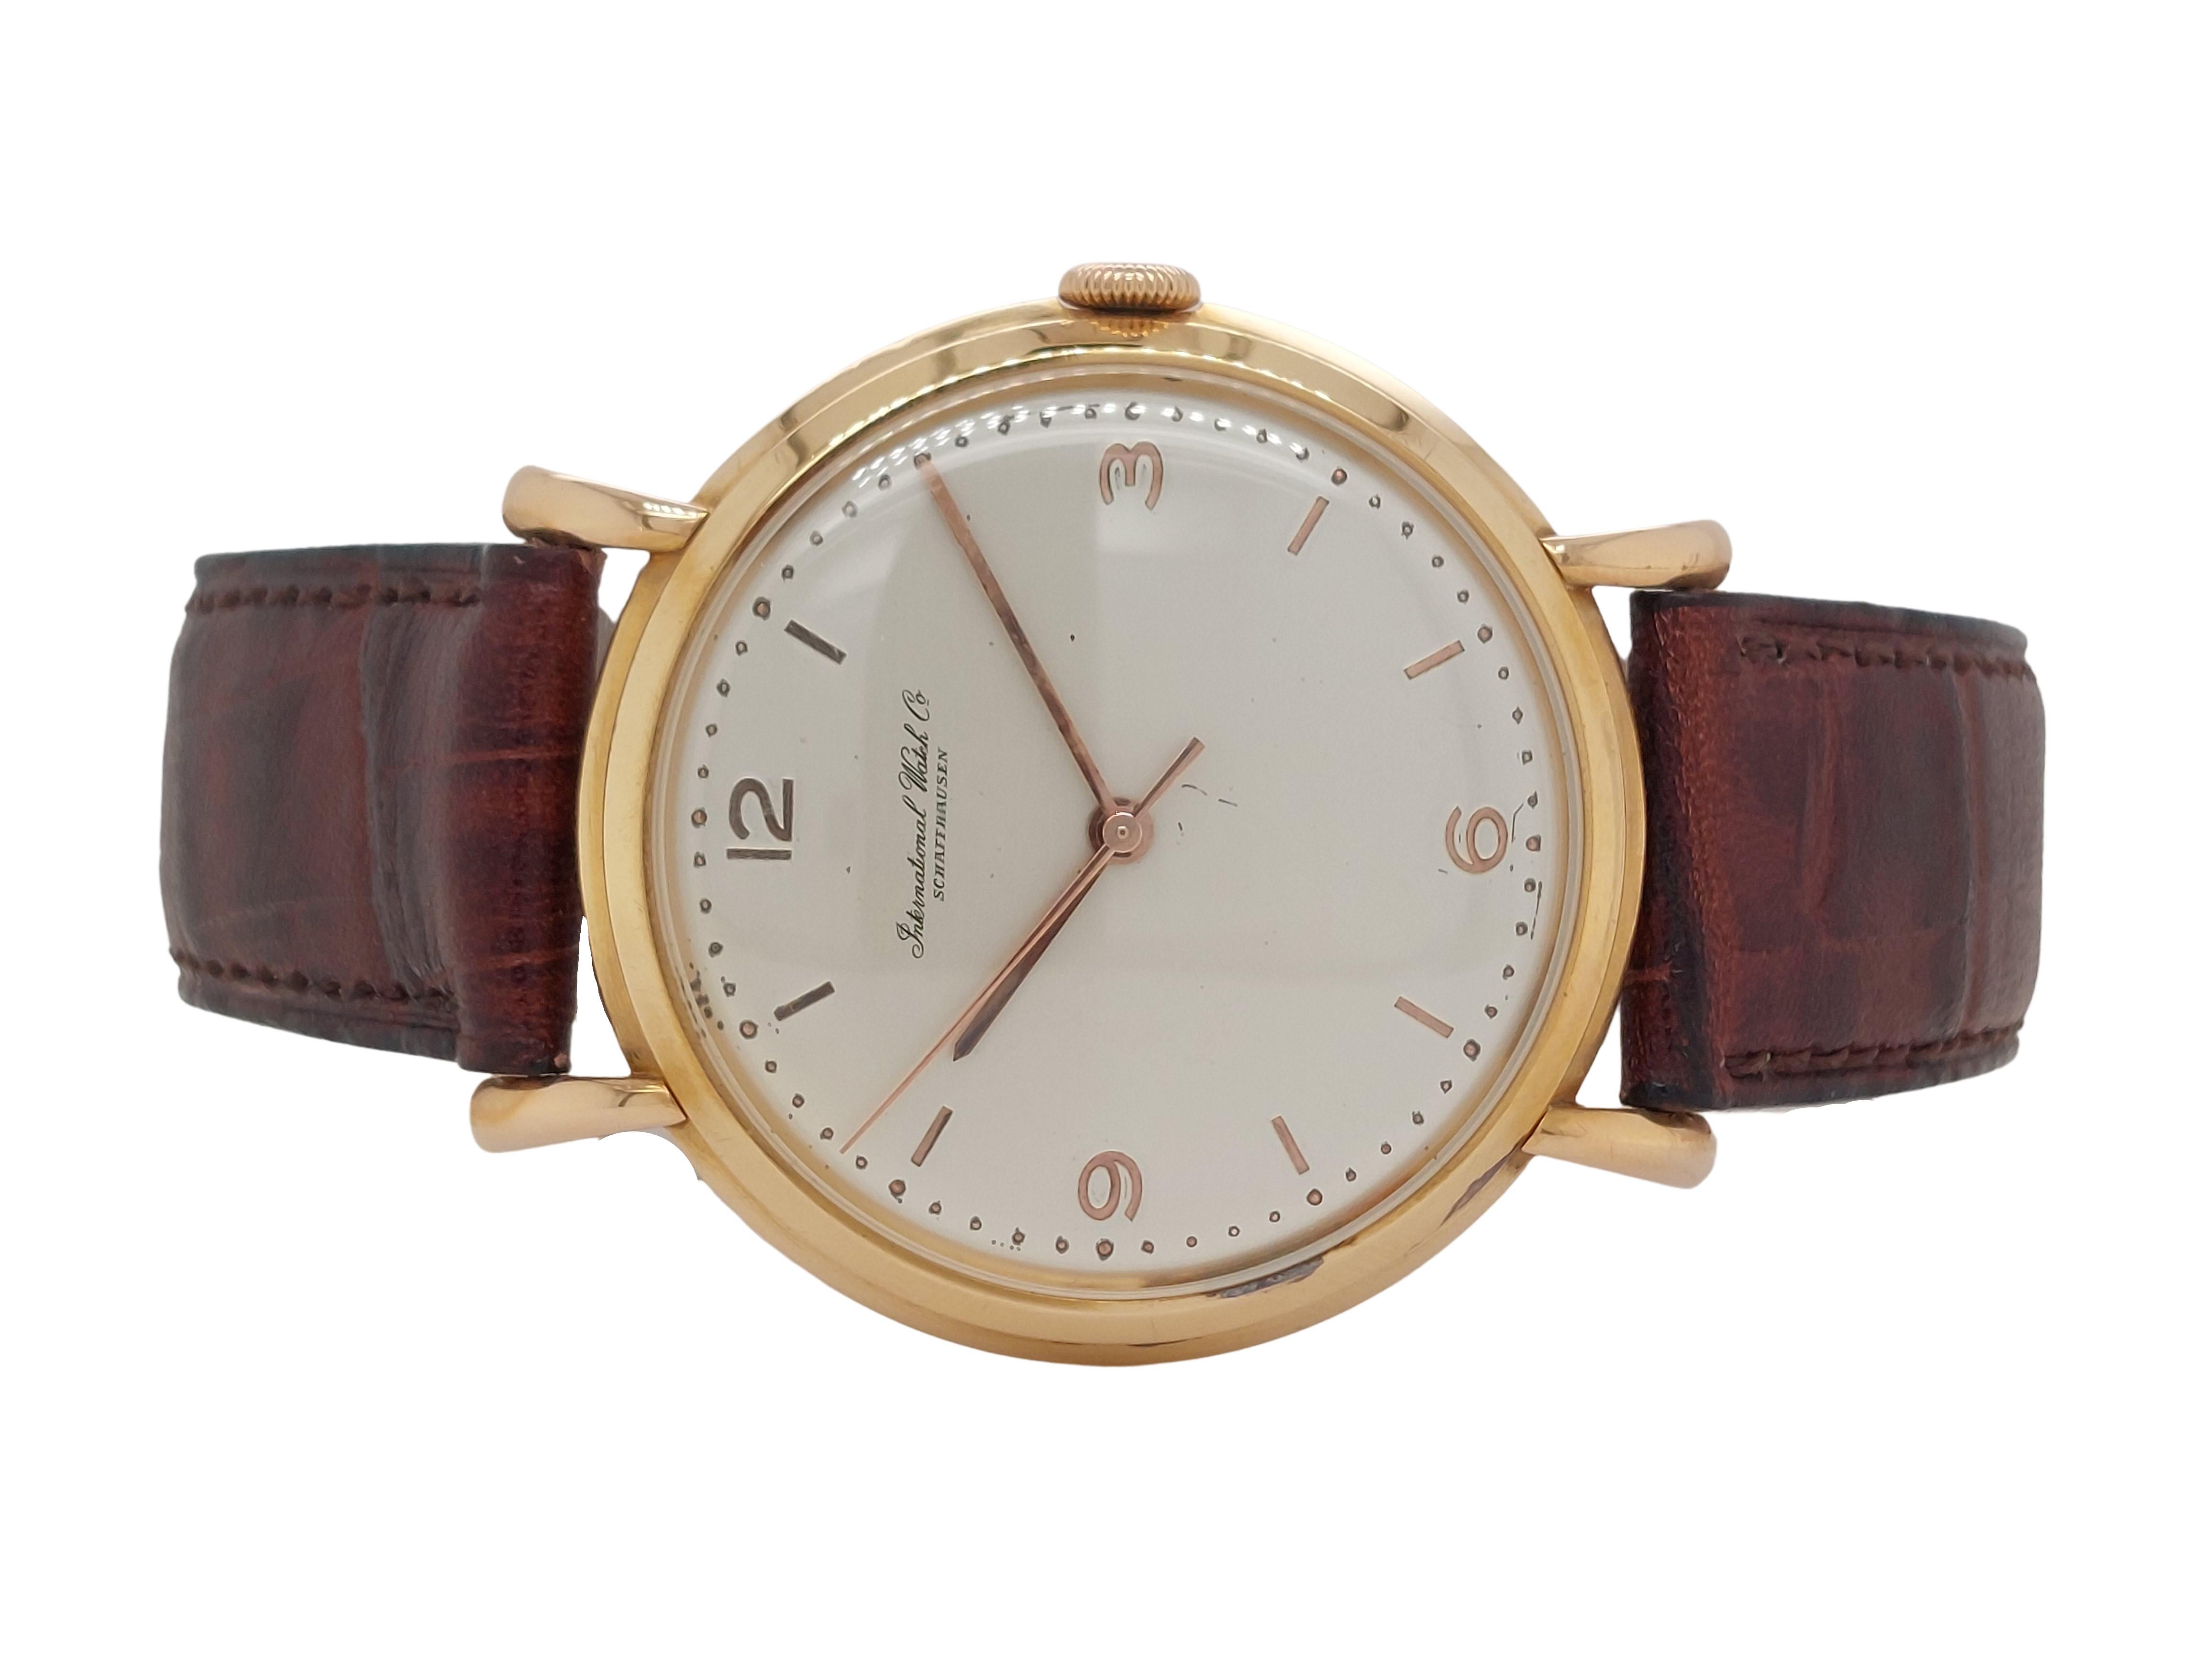 18Kt Yellow Gold IWC Wrist Watch, Caliber 89, Diameter 36.5mm

Calber: 89

Movement: Manual winding

Functions: Hours, minutes

Case: 18kt Yellow gold case 36.5mm x 9mm 

Dial: Goldish dial with Arabic numerals

Strap: Brown leather strap, with